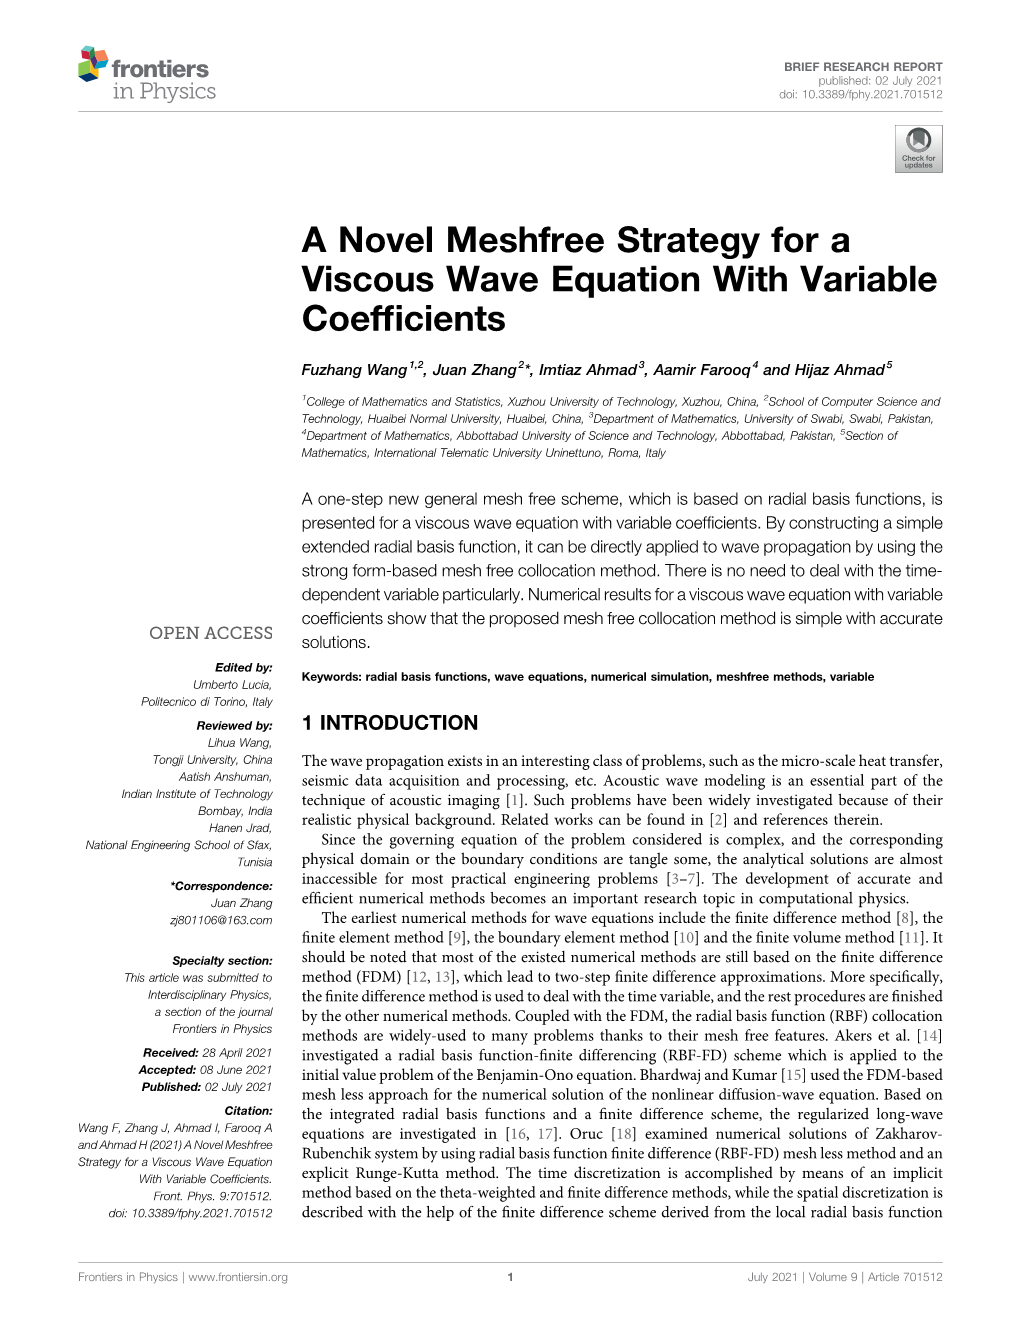 A Novel Meshfree Strategy for a Viscous Wave Equation with Variable Coefﬁcients